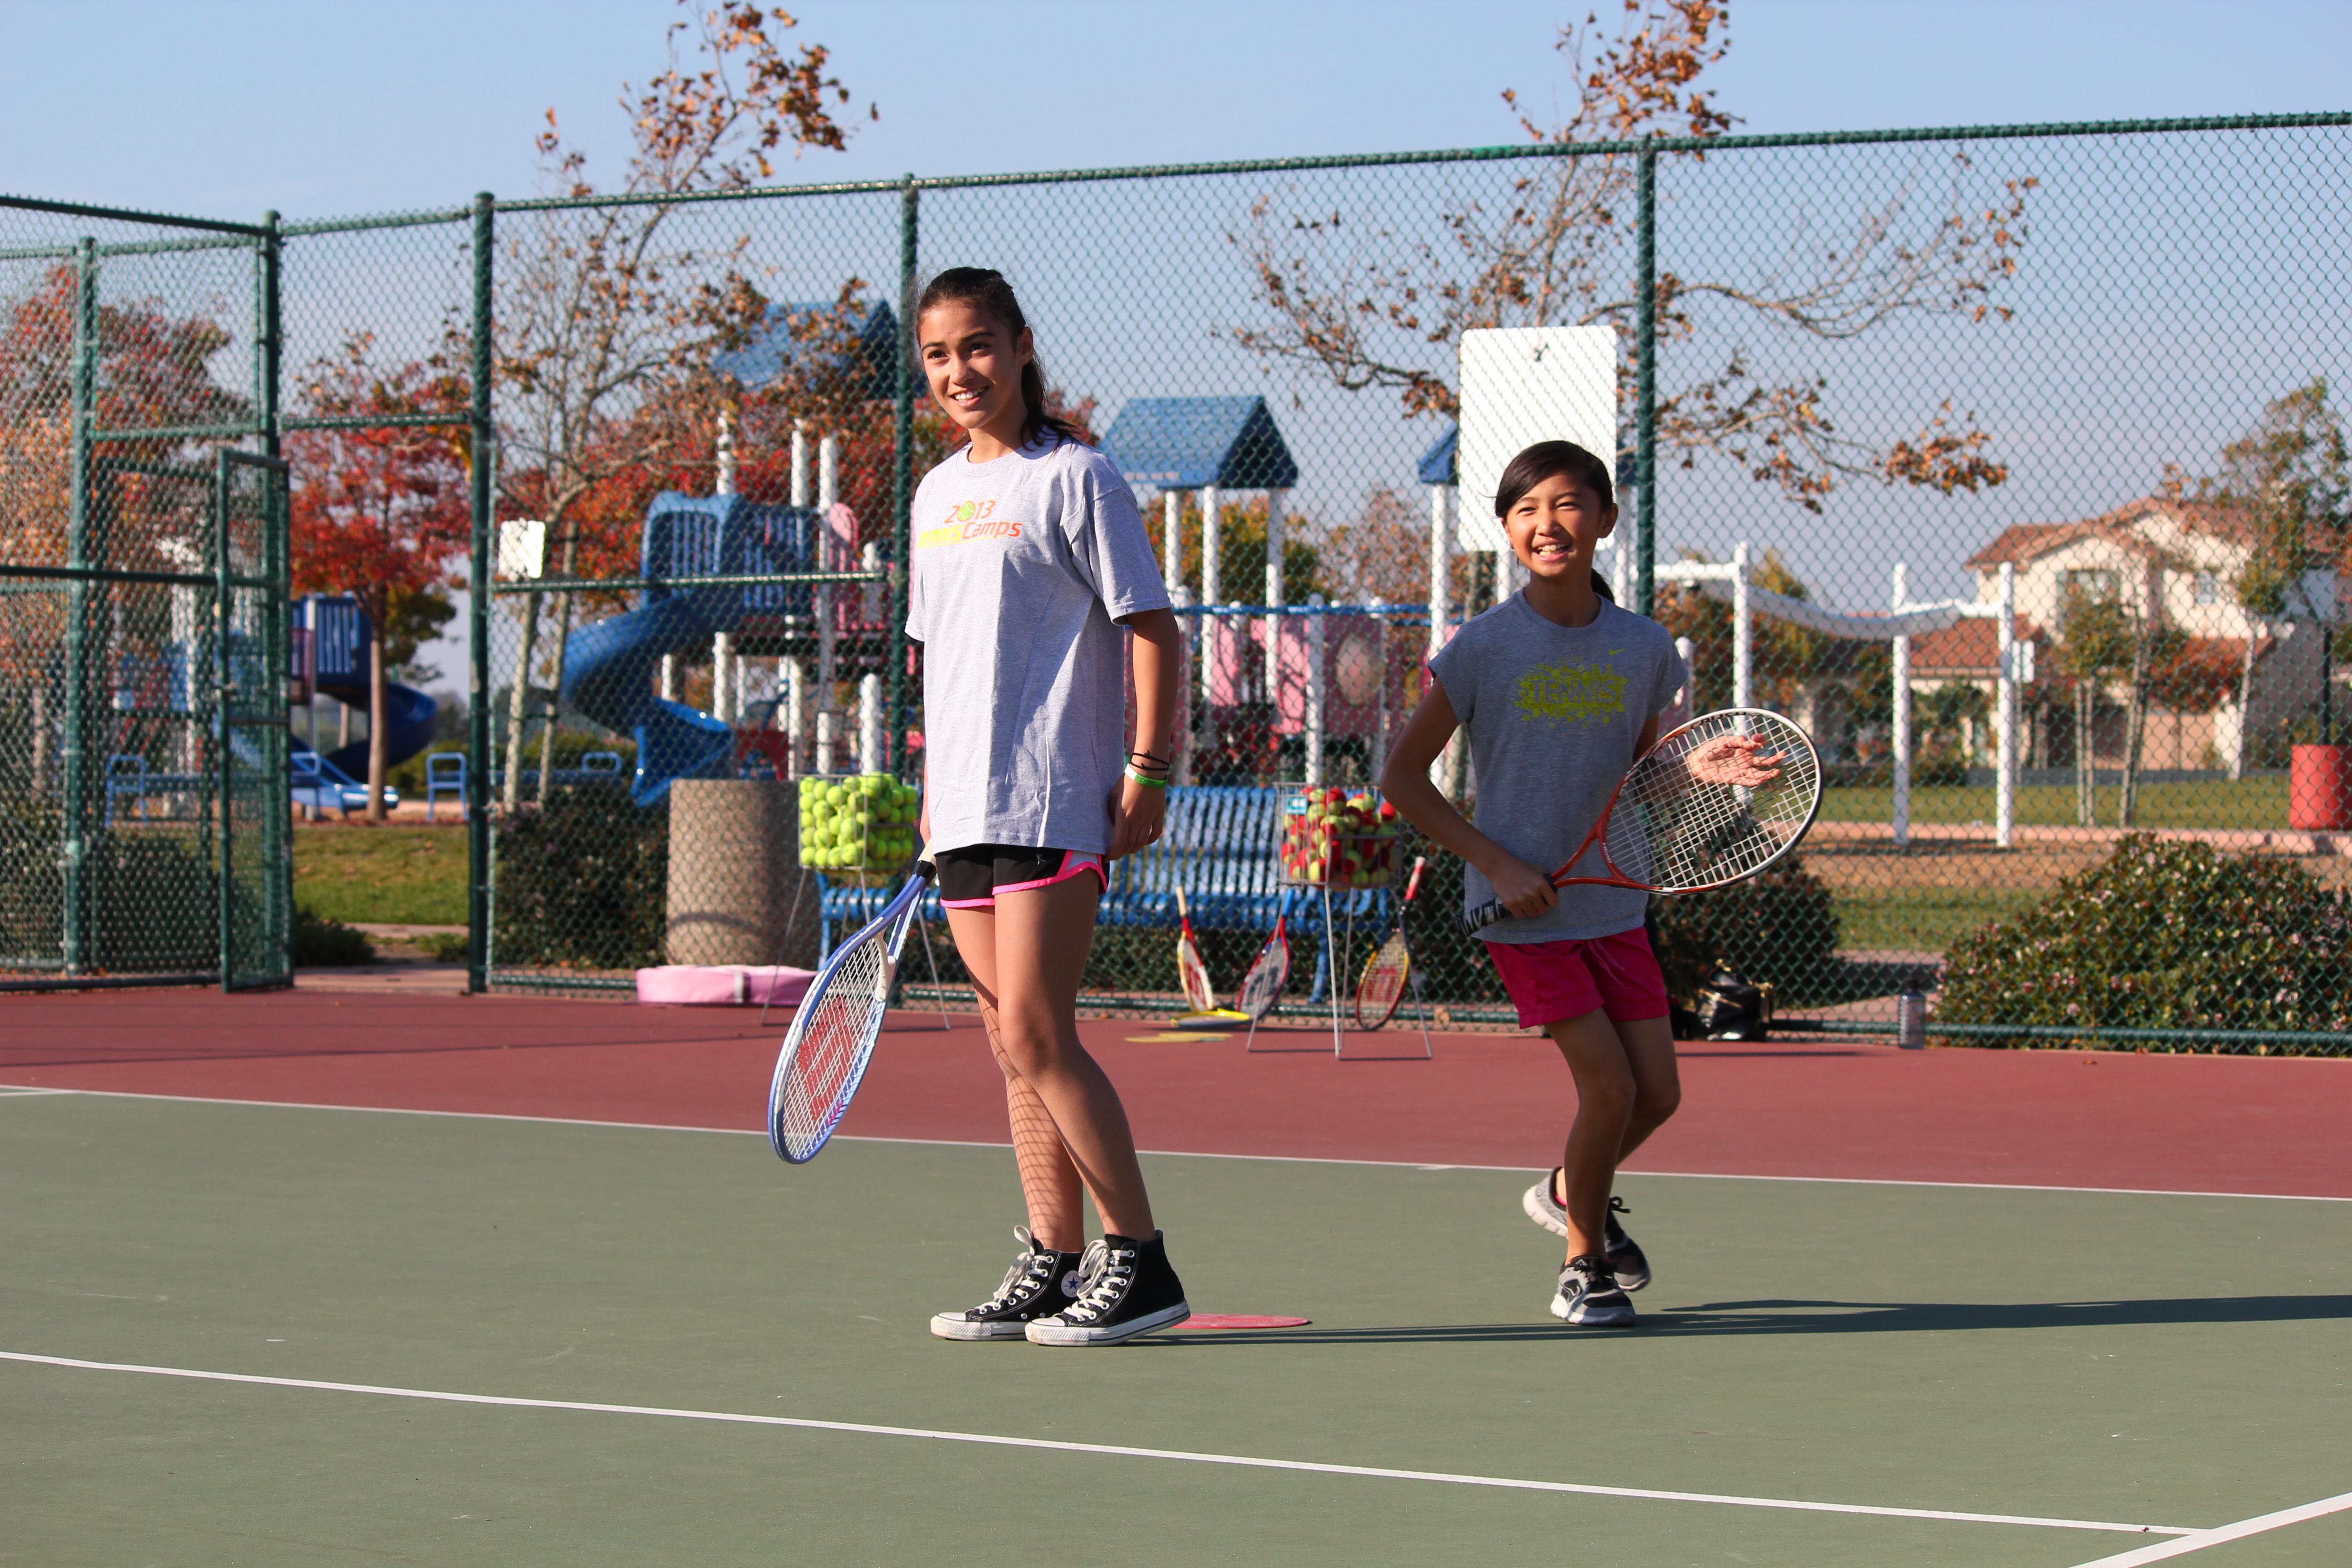 Paid Adult Tennis Classes in Fremont (Novice Ages 15 and up)